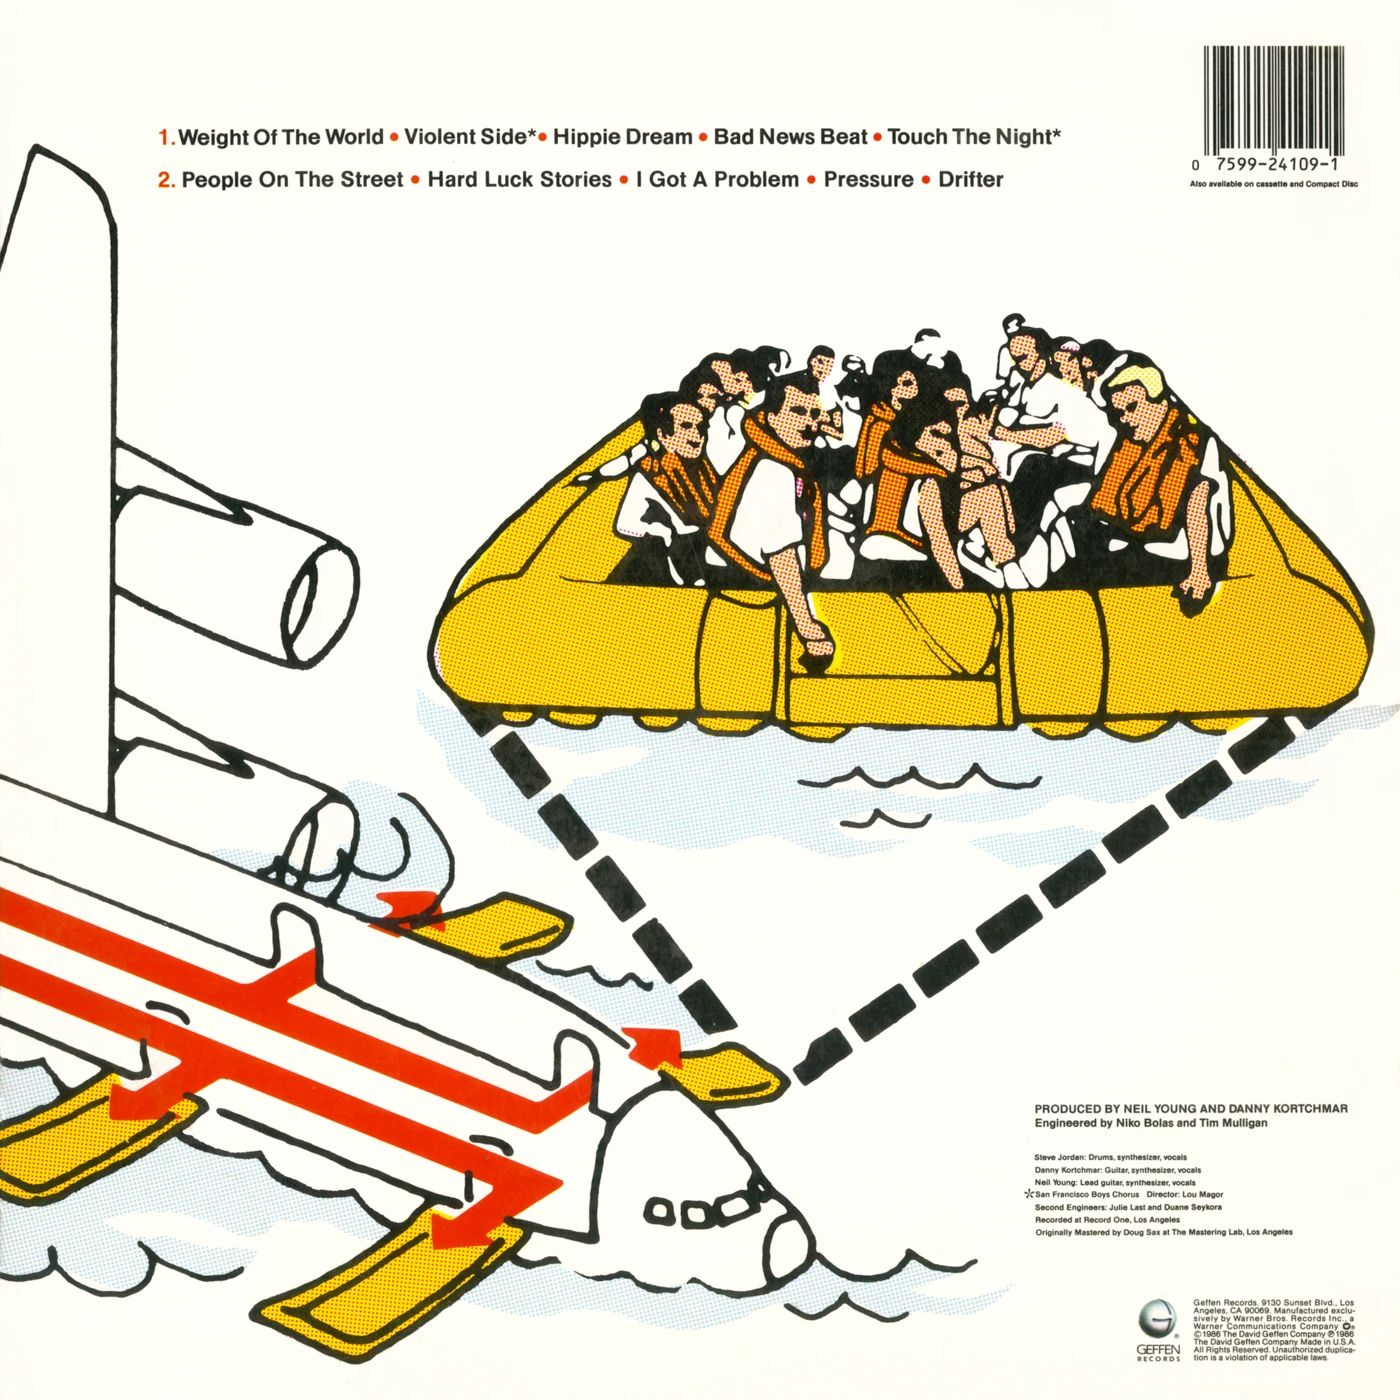 Landing On Water back cover